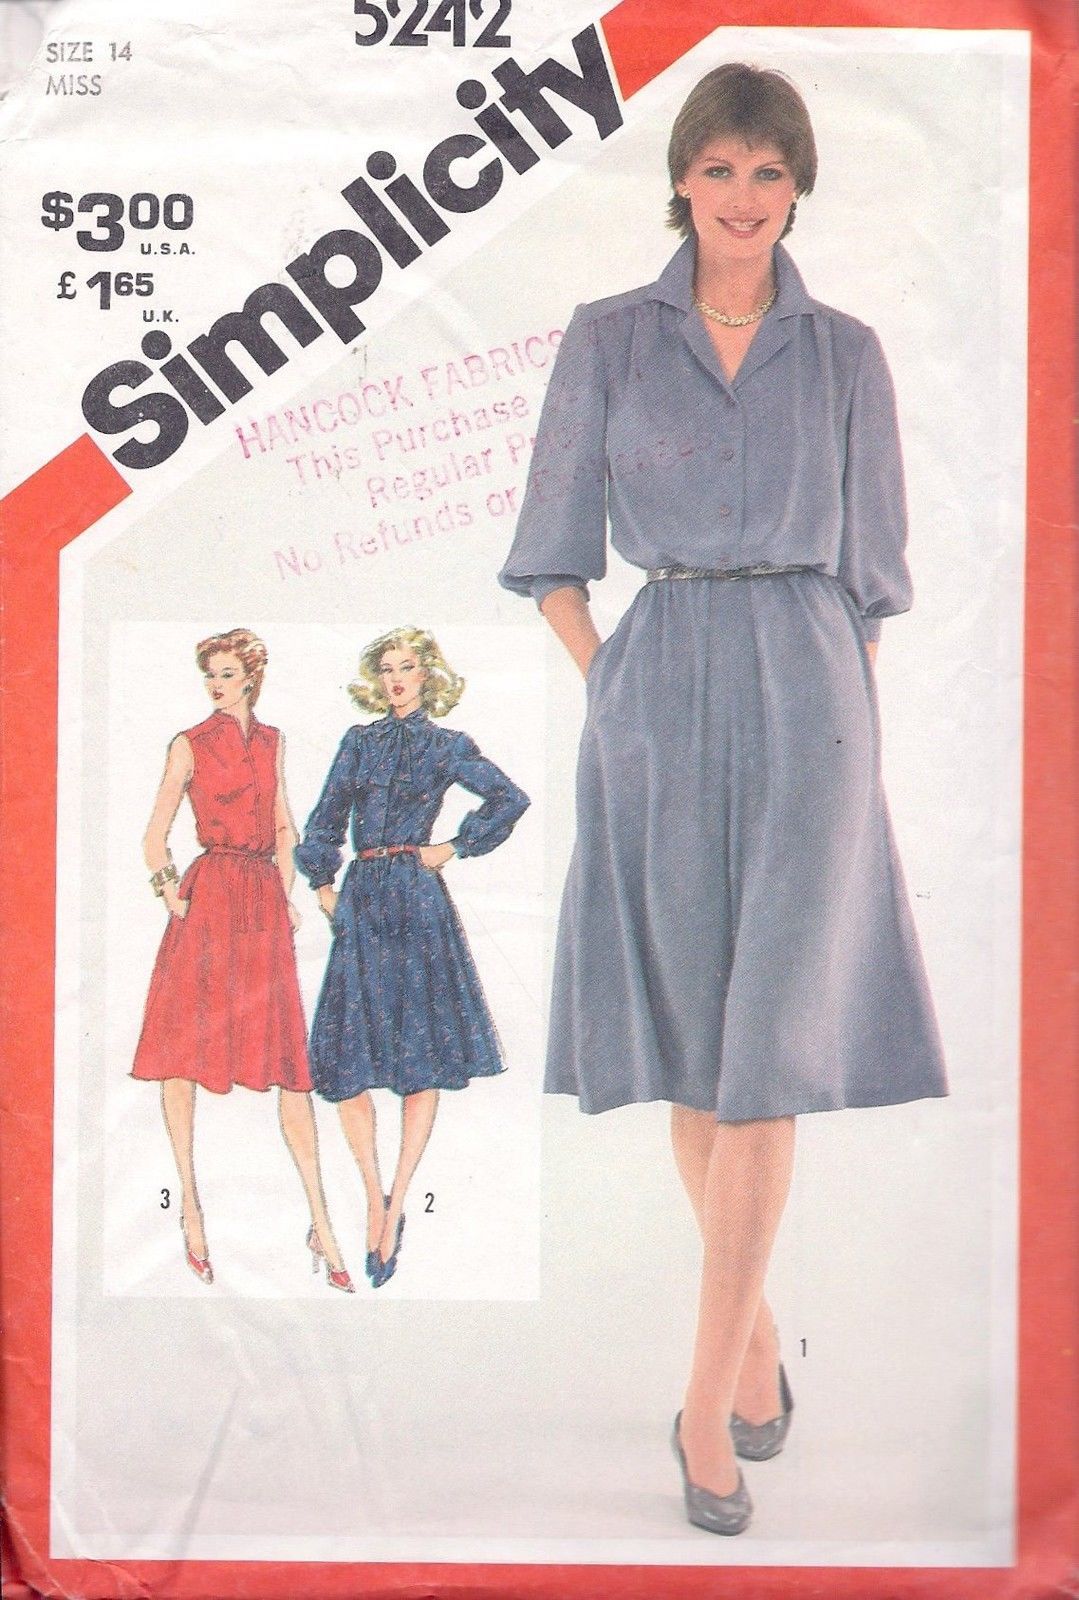 Simplicity Pattern 5242 Misses' Pullover Shirtdress Size 14 - $2.00